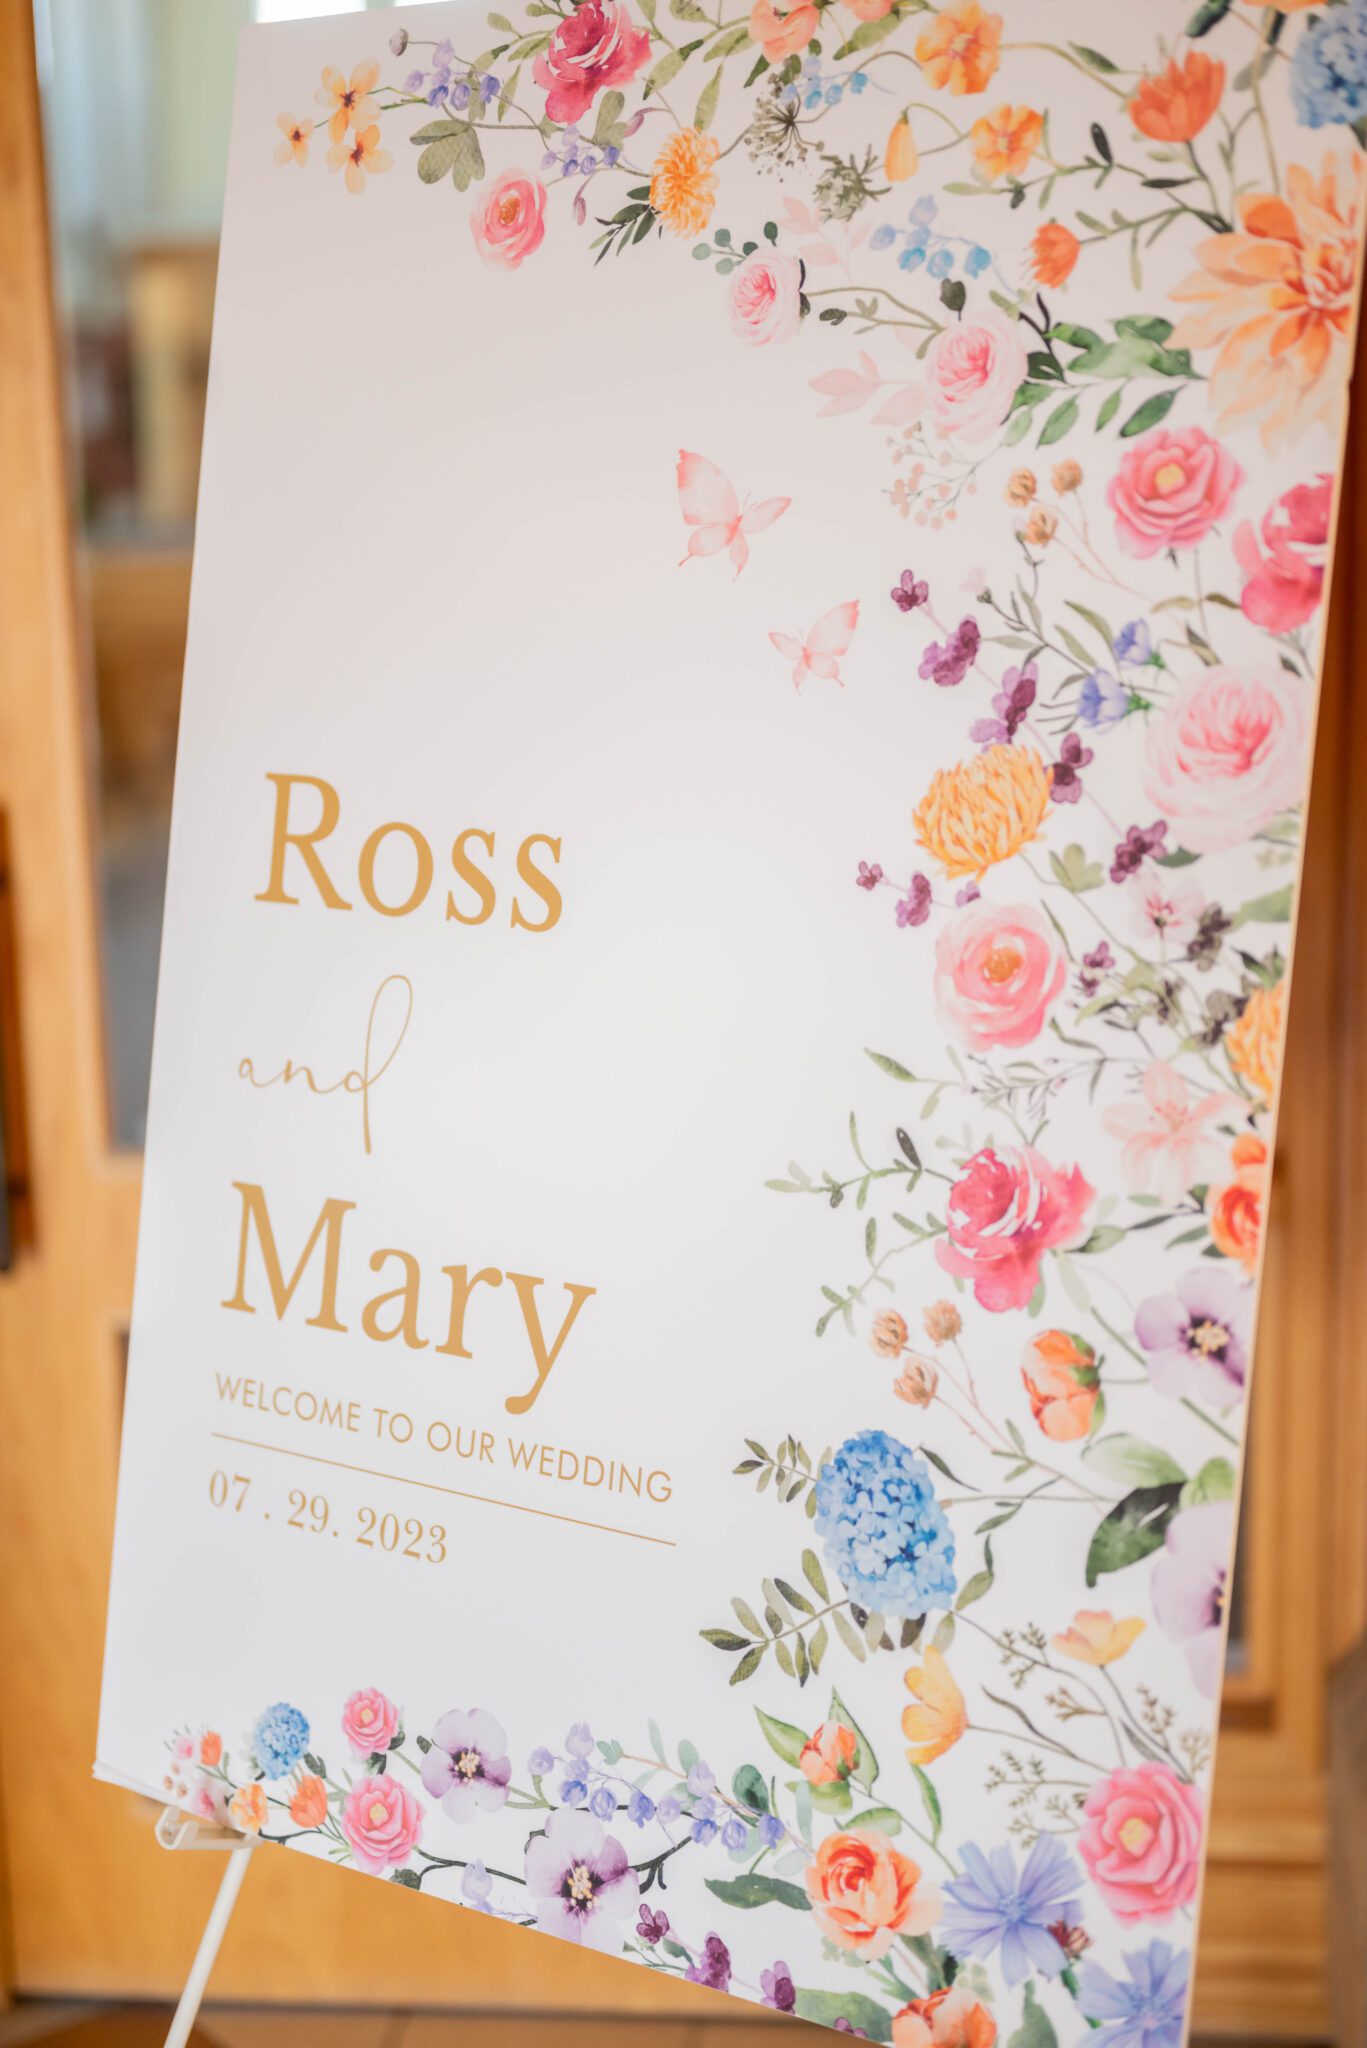 Floral-patterned custom welcome wedding sign at the front of the ceremony church location, whimsical garden wedding.